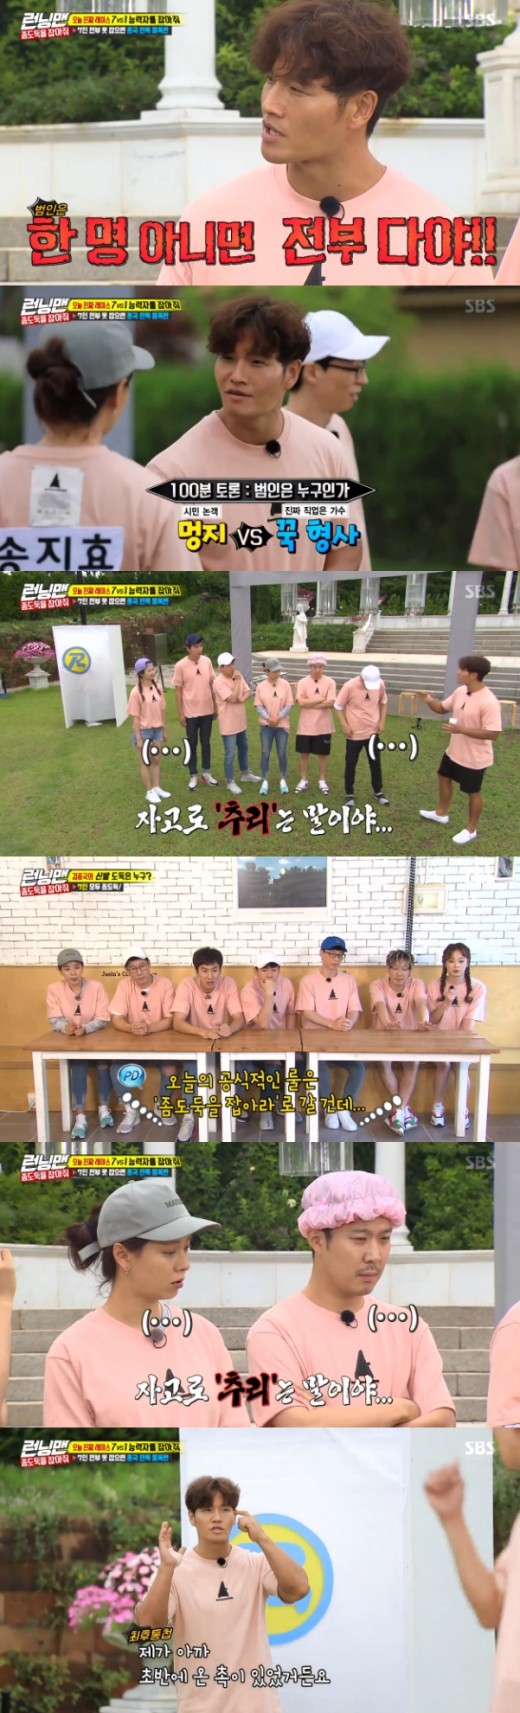 Kim Jong-kook succeeded in arresting The Little Thief with a cheeky look at the detective.On SBS Running Man broadcasted on the 29th, a mission was drawn to find Kim Jong-kooks shoe thief.The crew prepared for the opening with a full-fledged dinner. The members who entered the restaurant were suspicious of Why are you doing this from the beginning?The production team said, It was difficult to shoot these days, so I prepared it especially from the meal. However, the writers wrote something every time the members ate food.Members who came out after the meal. At this time Kim Jong-kook knew that his shoes had disappeared.The members suspected the members who took place in the position of Ji Suk-jin, Song Ji-hyo.Ji Suk-jins suspicious behavior, which comes out especially when he knows the secret to himself, has attracted the most suspicion; members read Ji Suk-jins expression and said, Its so obvious.Lets shoot my eggs again, he said, laughing.Even after that, Ji Suk-jin was pointed out as the most likely Little Thief The Suspect in hints such as right elbow spots, hairless legs, and wrist thick photographs.Kim Jong-kook, who only drives Ji Suk-jin to the crime scene. And two people who have been on the side since morning.There was also suspicion that Kim Jong-kook and Ji Suk-jin were the self-made drama.At the end there was a twist: The Little Thief was all seven except Kim Jong-kook, not one.The production team planned this race by watching the members who were hit every time Kim Jong-kook was attached.The members hid the fact that seven people were accomplices, and it depends on who Kim Jong-kook picked in the final The Little Thief vote.If Kim Jong-kook did not vote for the entire Little Thief 7 in the final vote, Kim Jong-kook would be hit by a water bomb alone and present the desired shoes to The Little Thief, but the direction gradually flowed against The Suspects.Kim Jong-kook, who received a picture of a womans eye in the final hint, said its not one and nervously made all the members.Kim Jong-kooks tempo, who was convinced from the beginning that if you are not one Ji Suk-jin, you are all members. Kim Jong-kook proved once again to be a talented person with a victory over 7:1 with an extraordinary tempo.